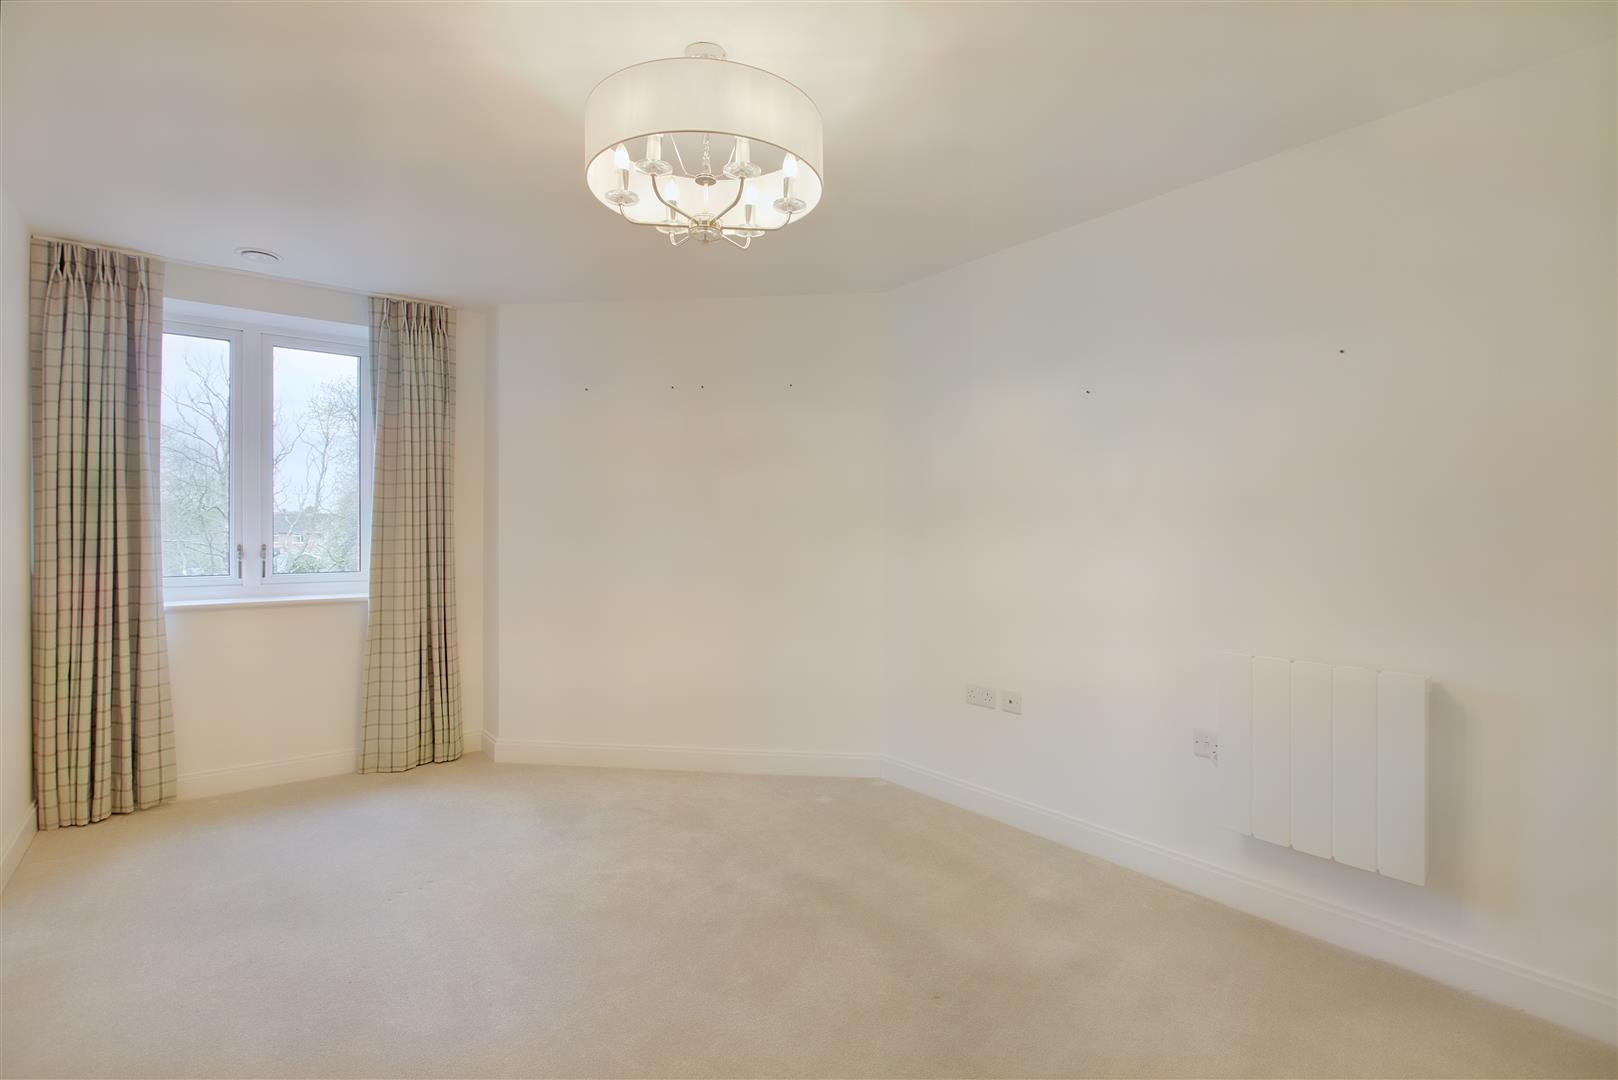 Oakhill Place, High View, Bedford, Bedfordshire, MK41 8FB